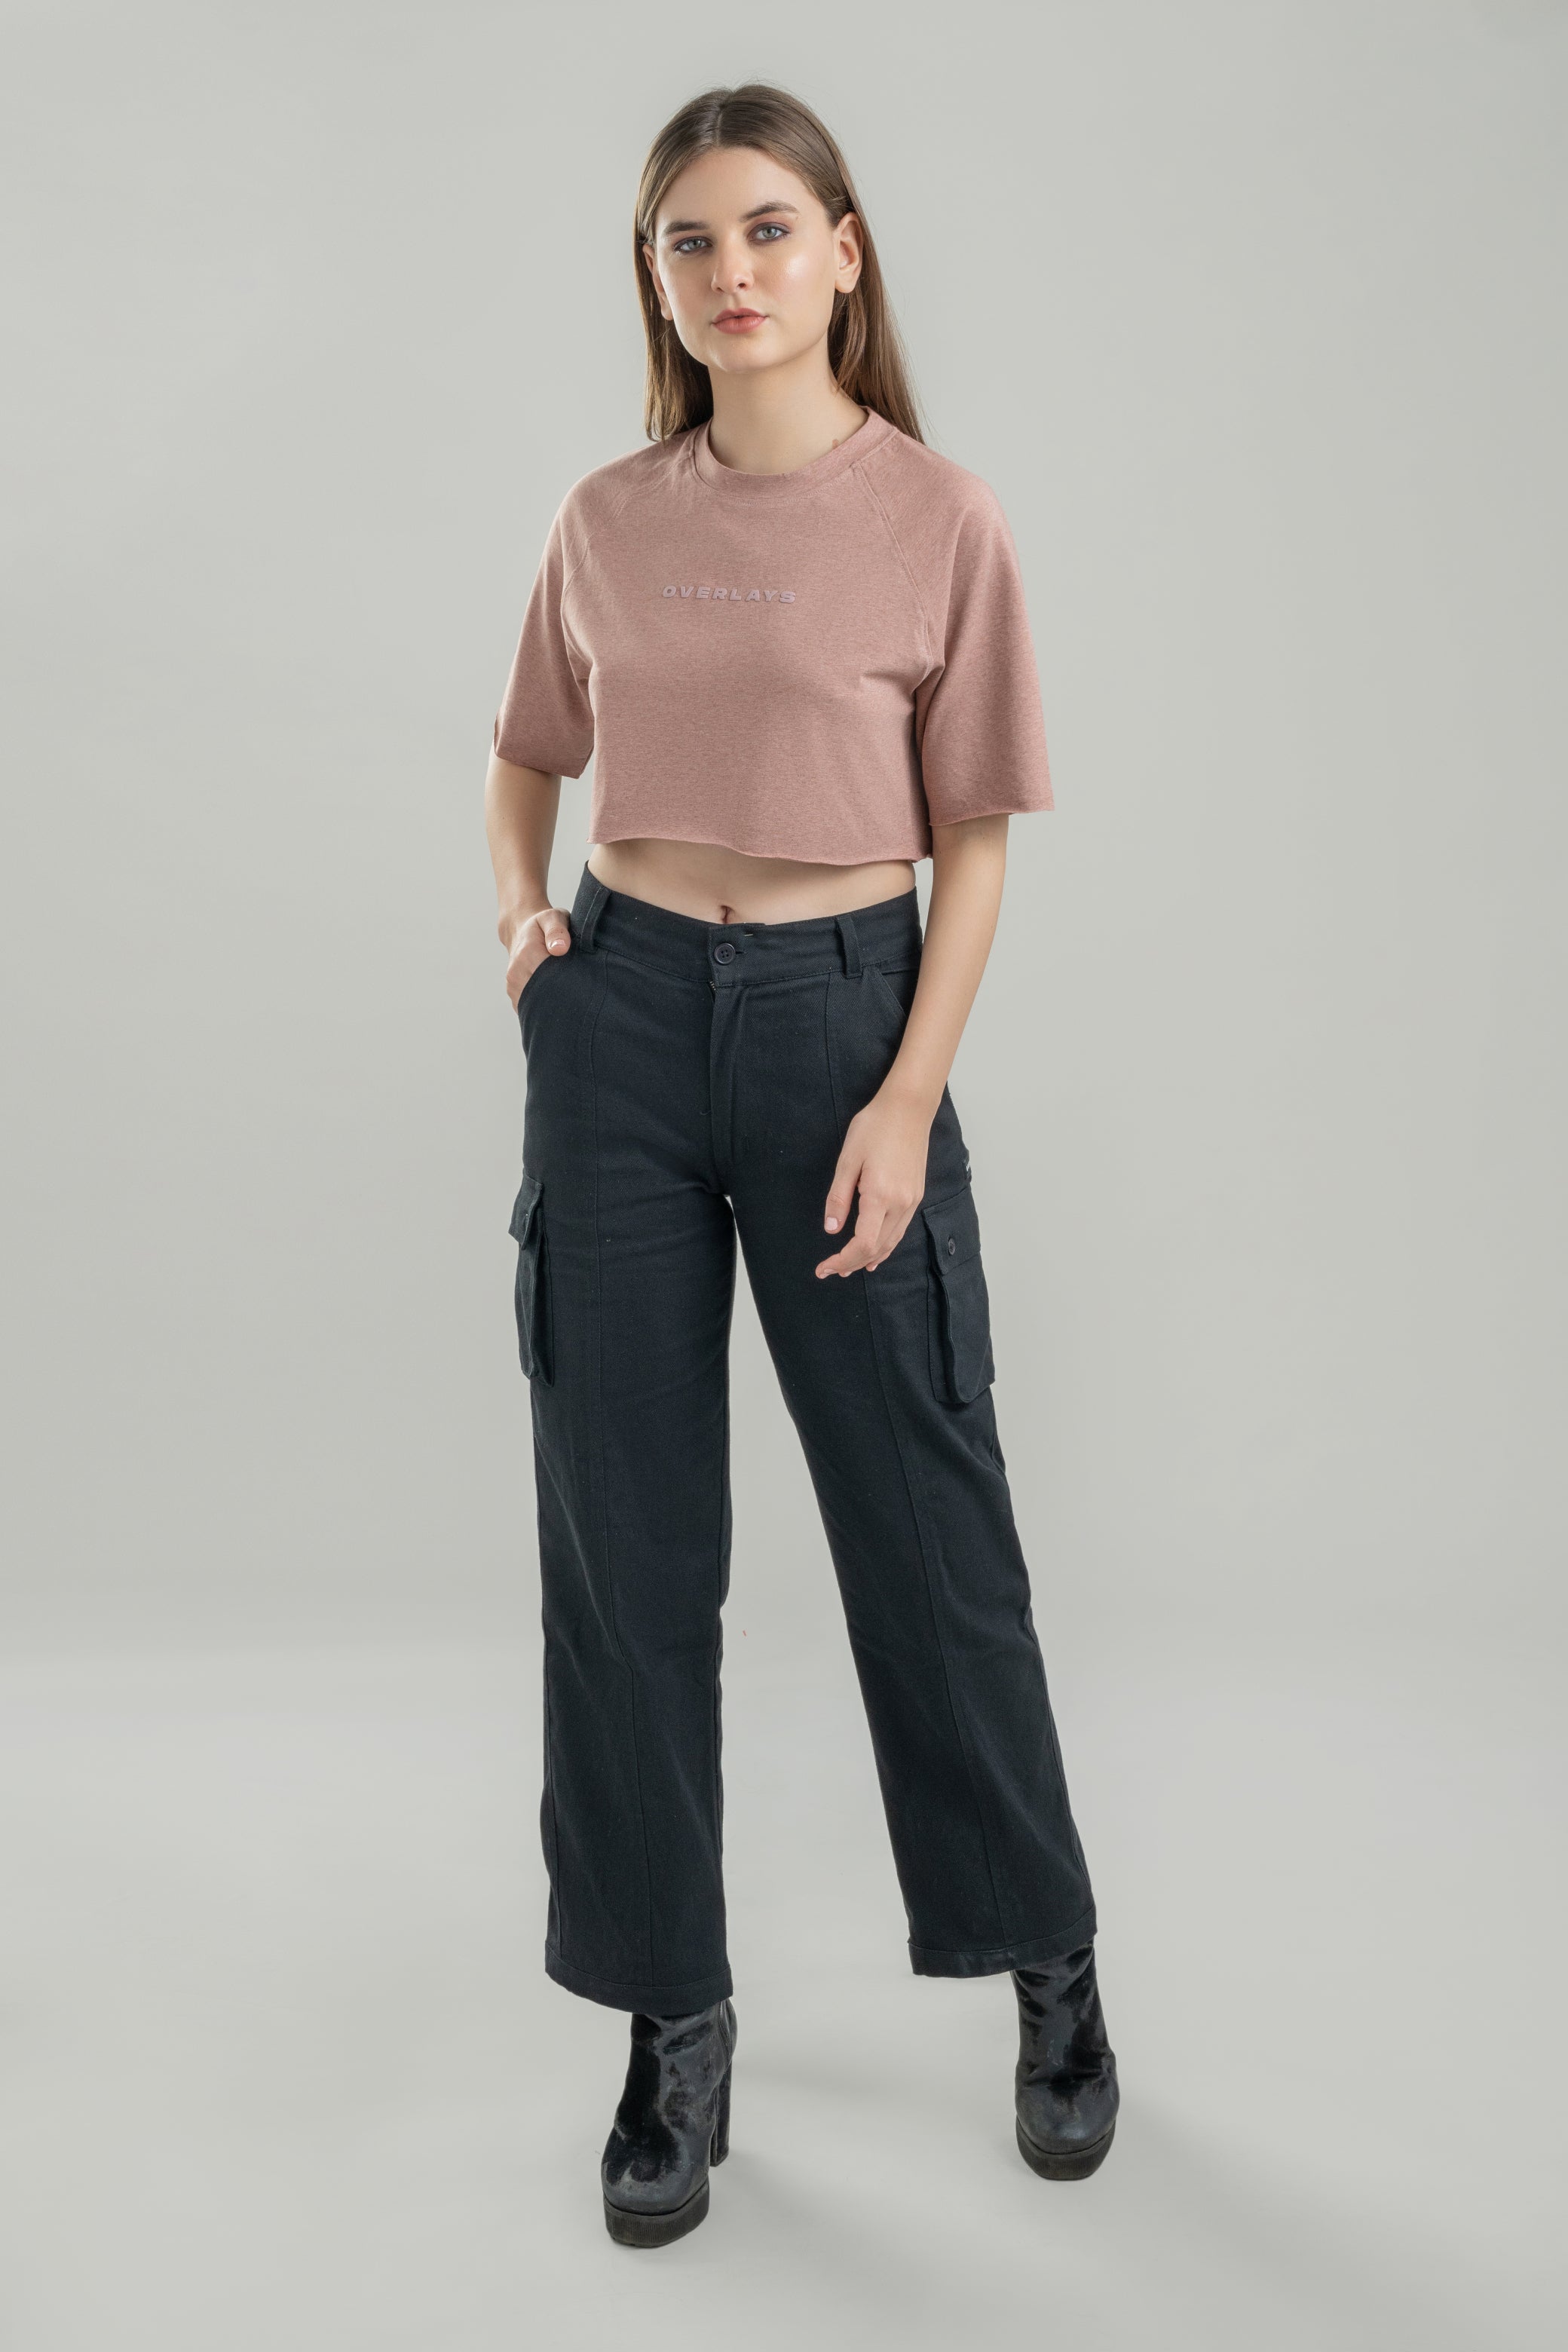 Relaxed Fit Brick Red Crop Top